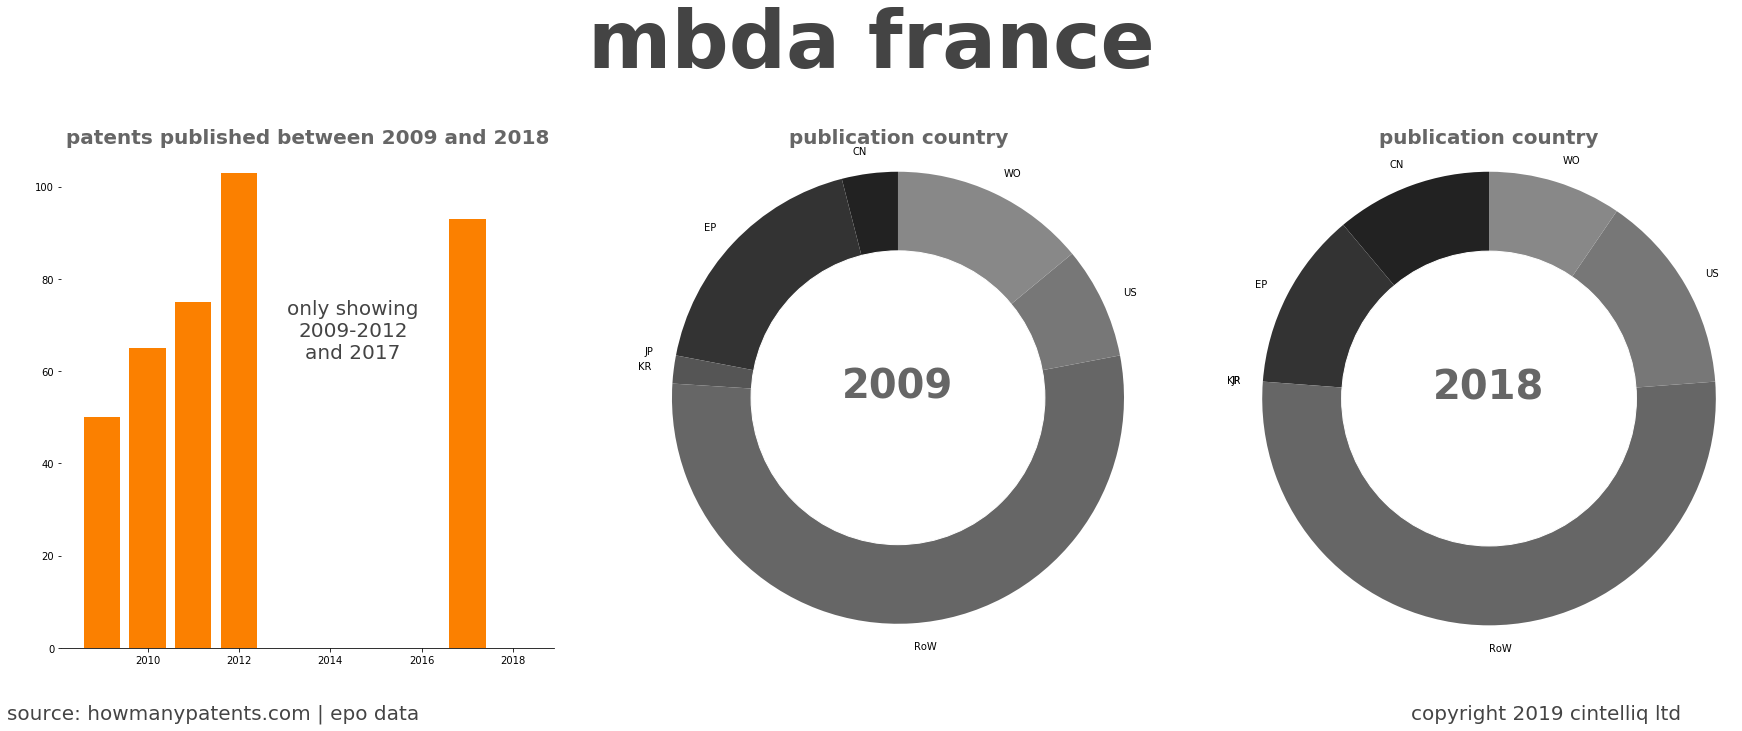 summary of patents for Mbda France